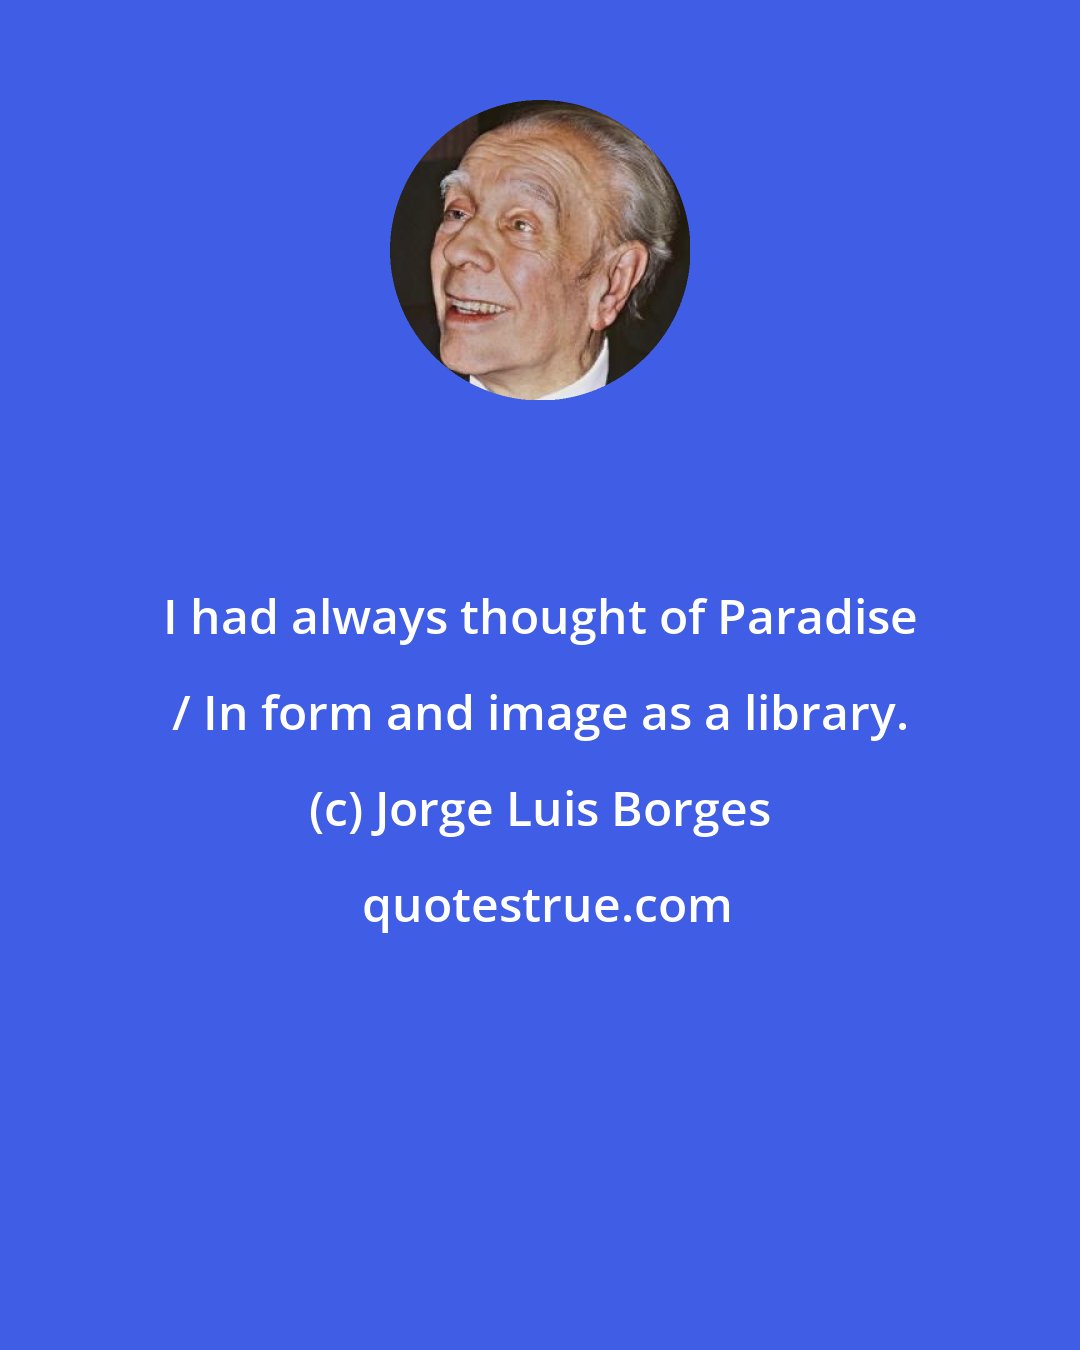 Jorge Luis Borges: I had always thought of Paradise / In form and image as a library.